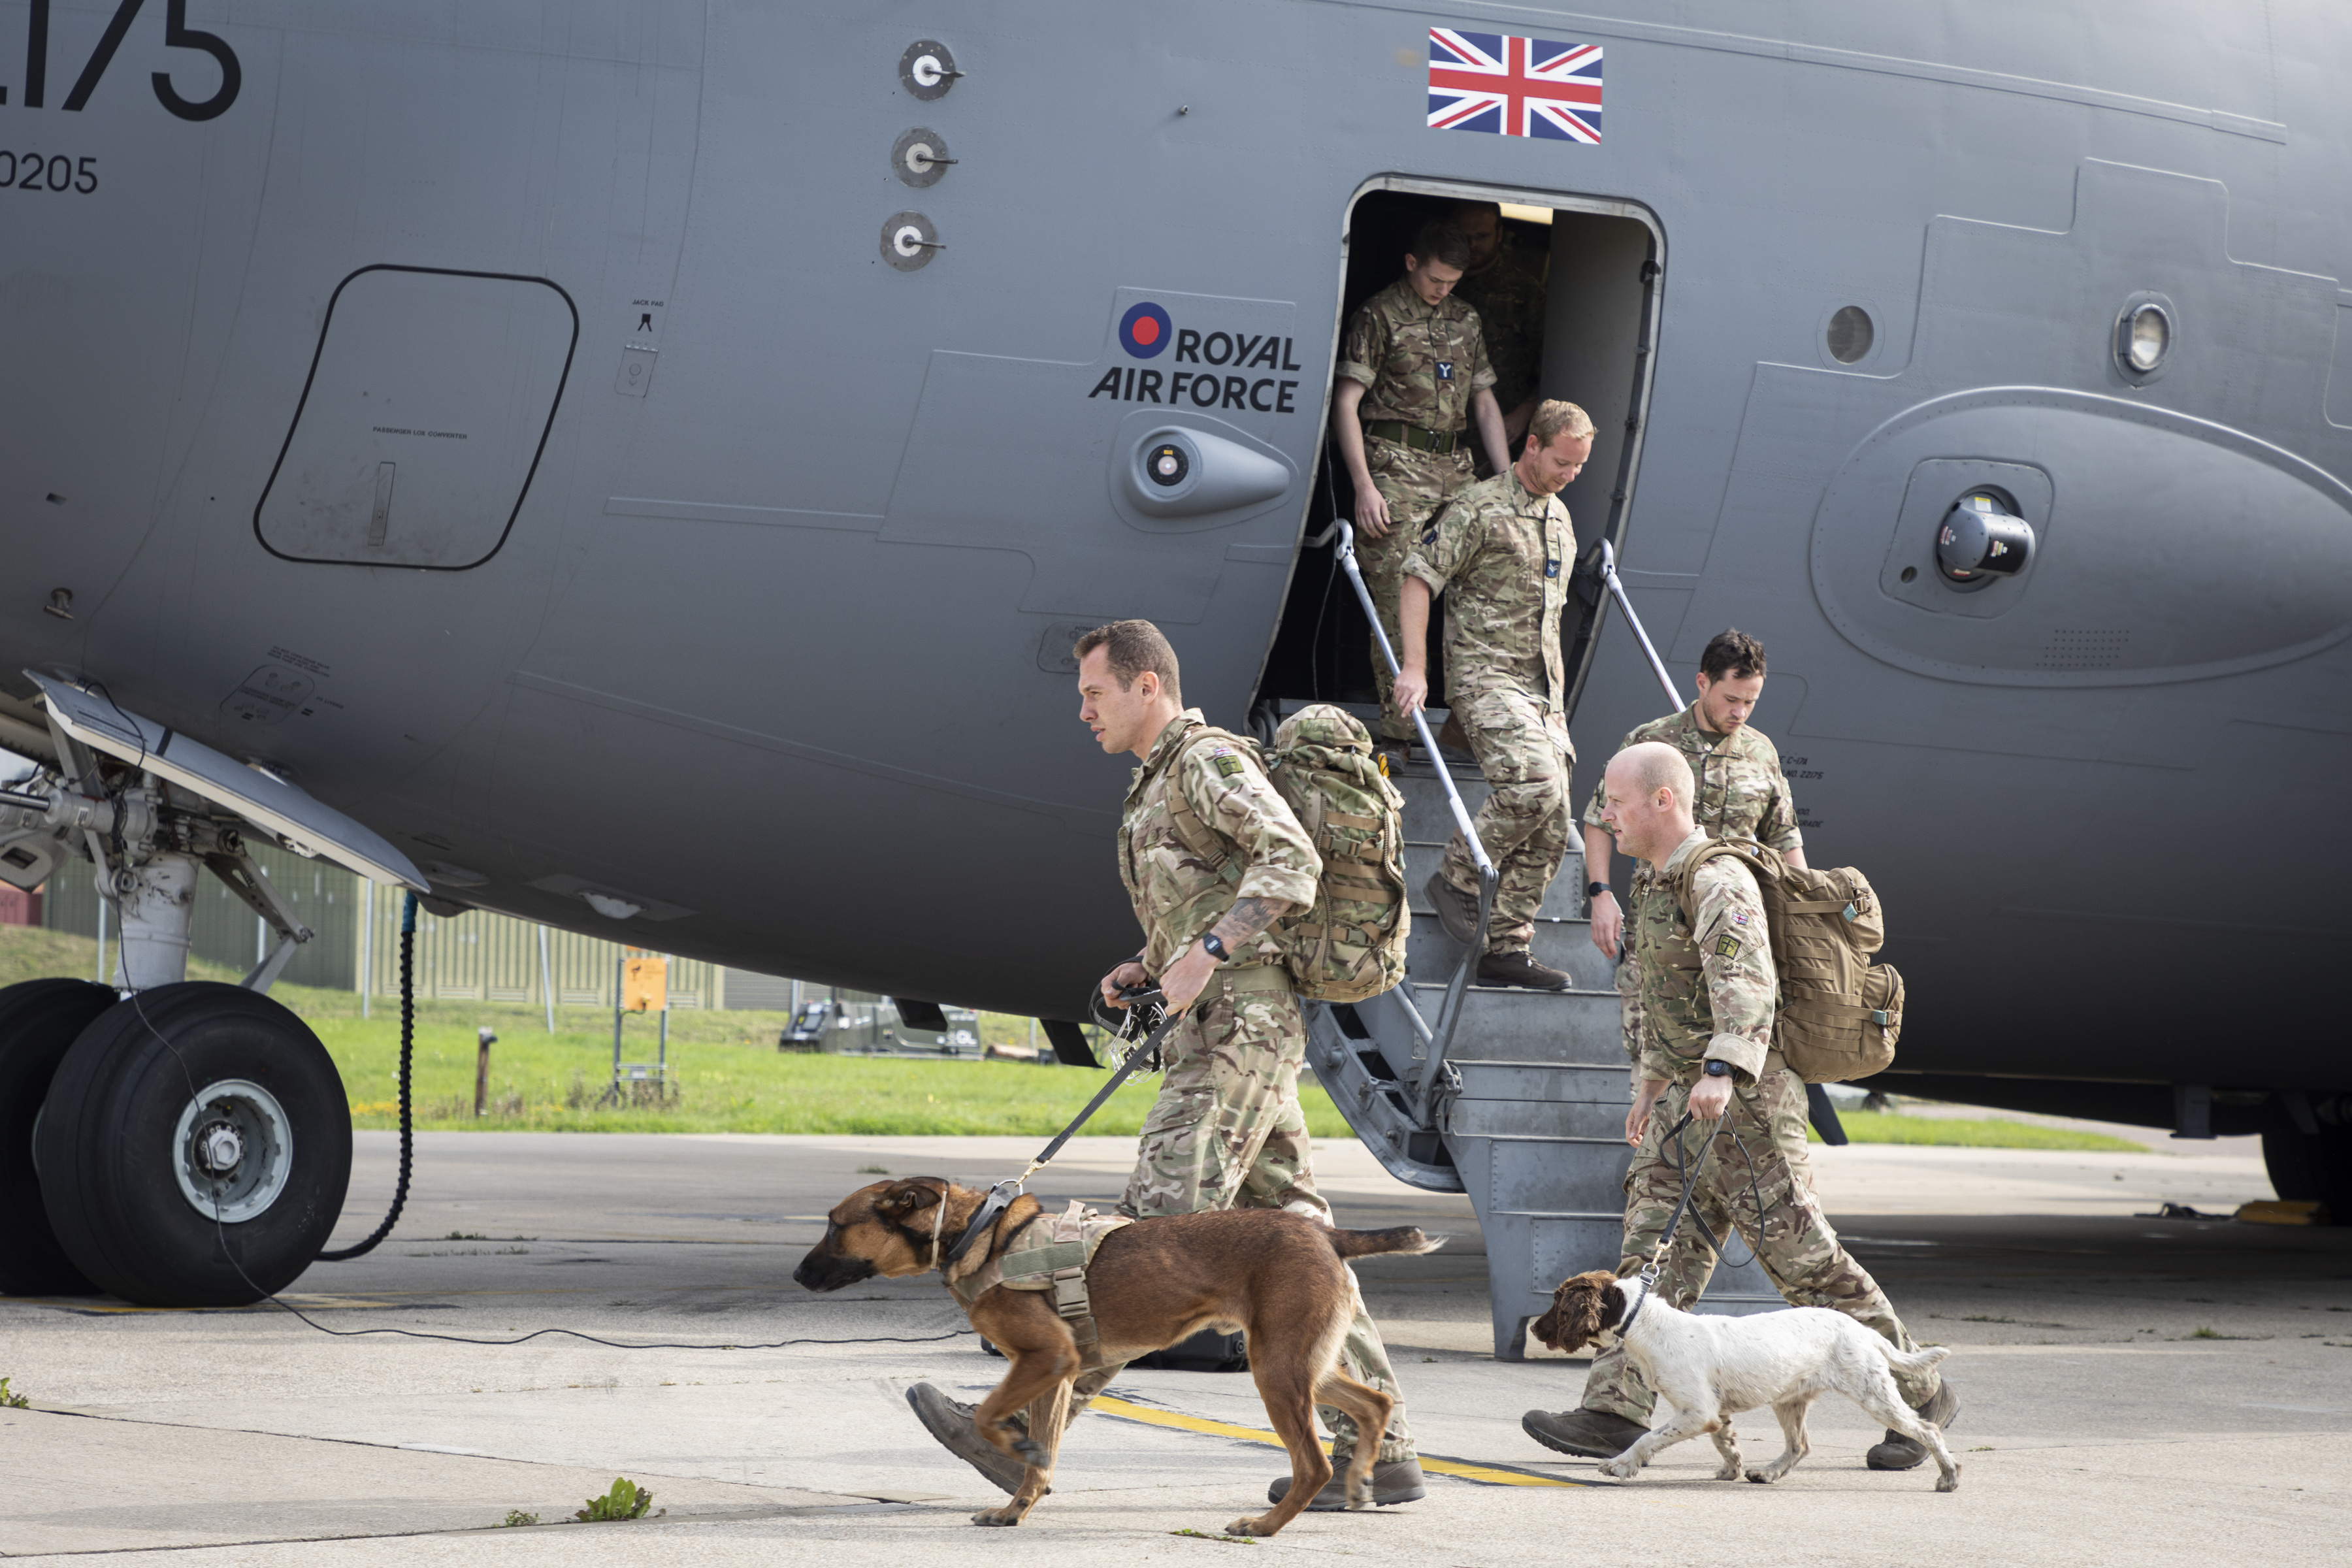 RAF Police and Working Dogs disembark from carrier aircraft.